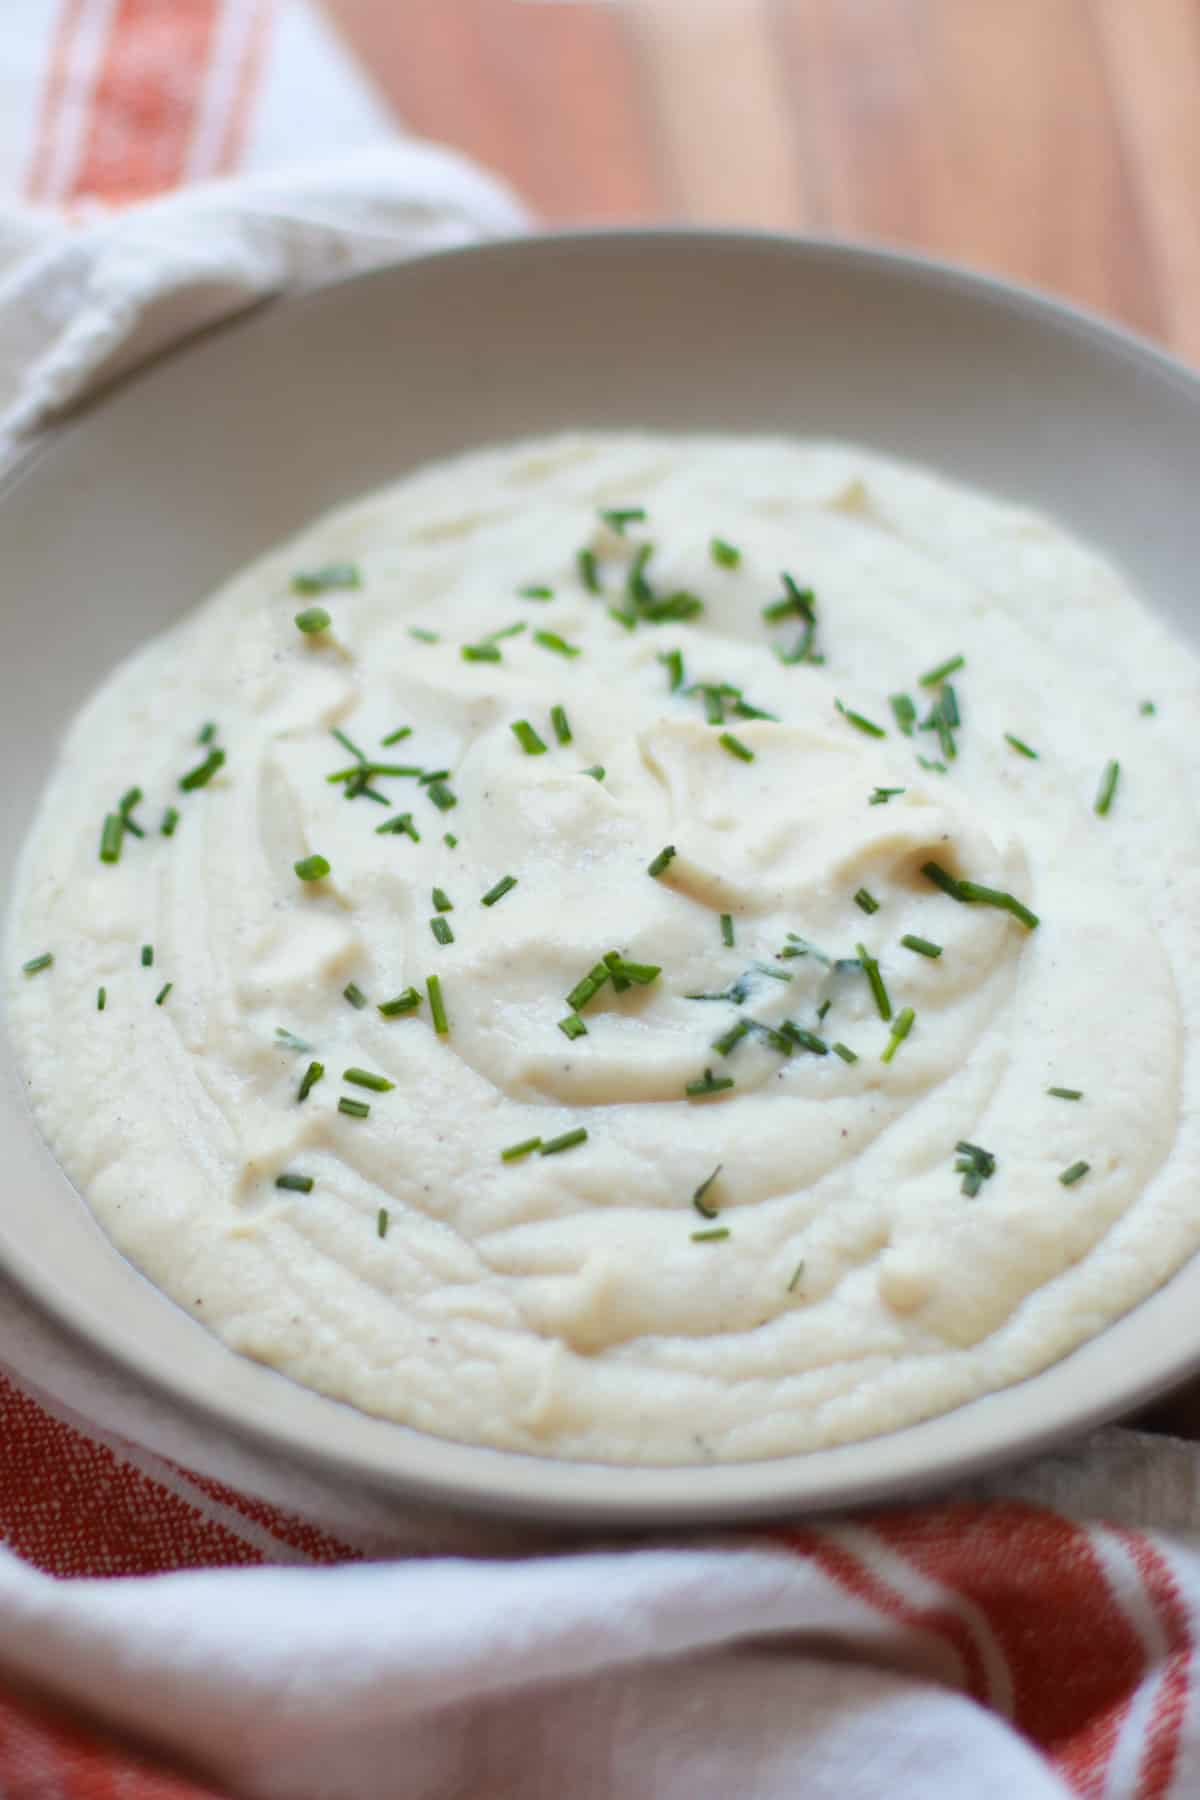 A close shot of mashed cauliflower with chives.